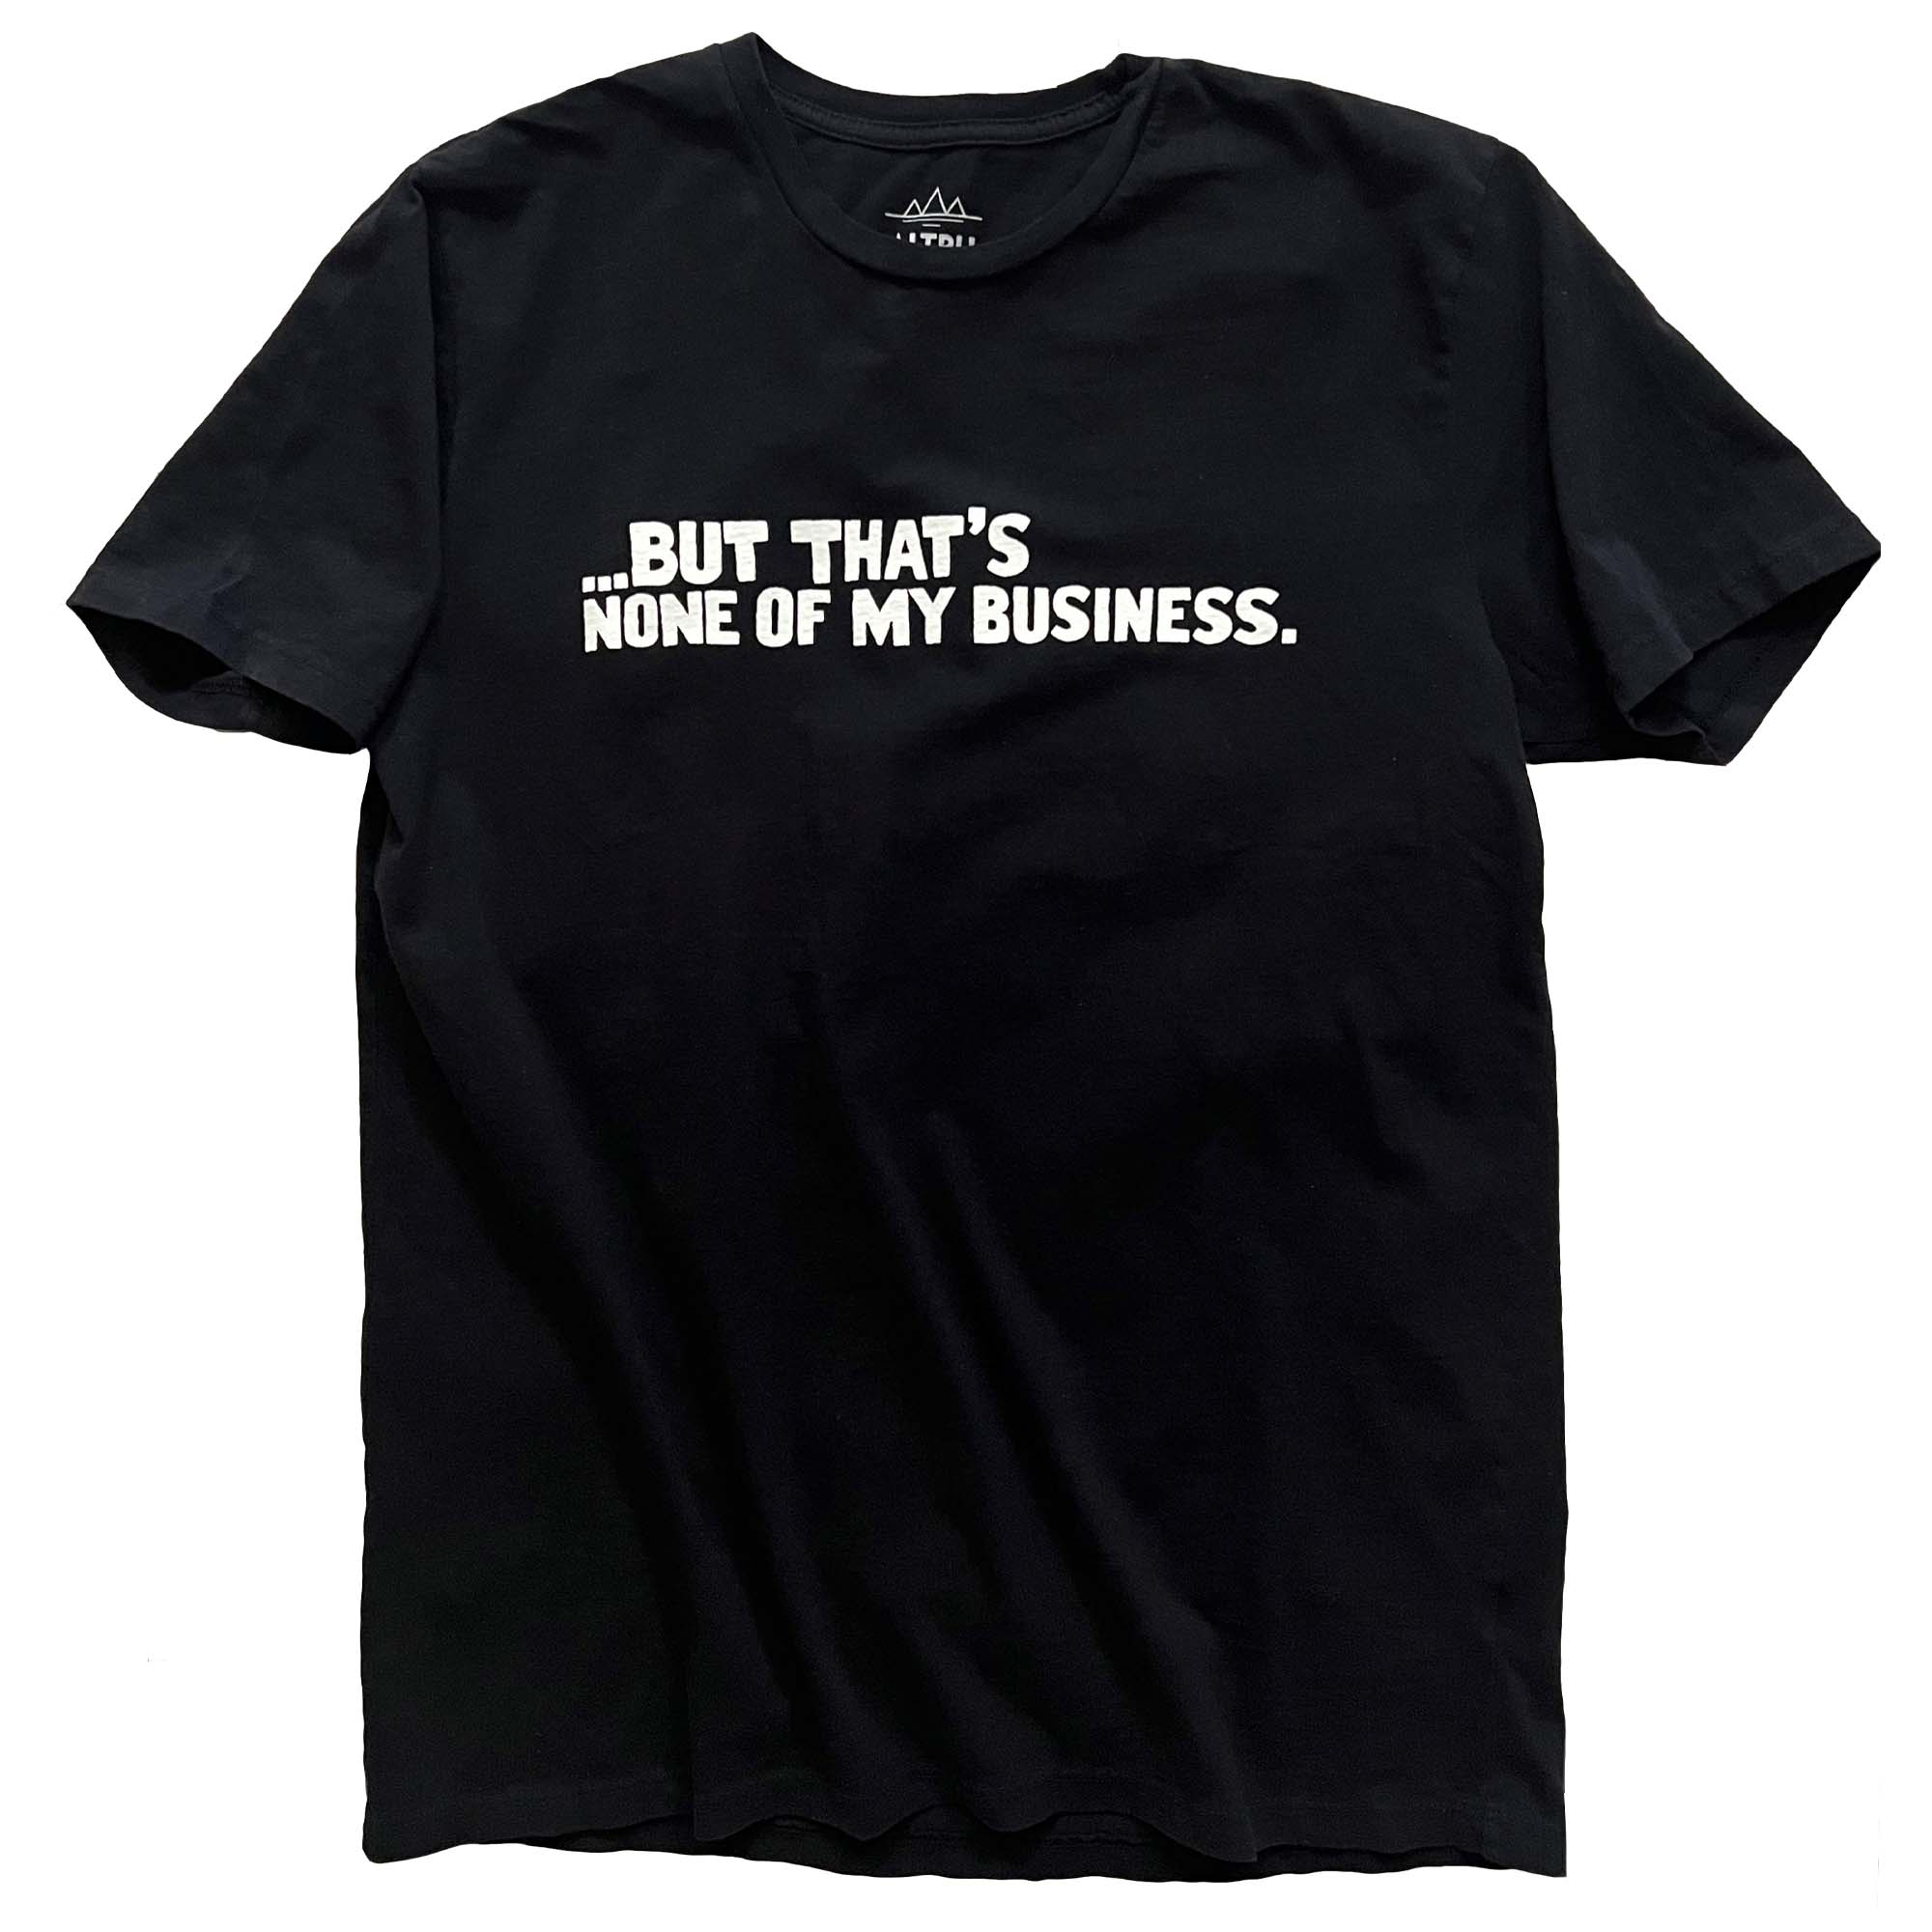 None of my Business tee